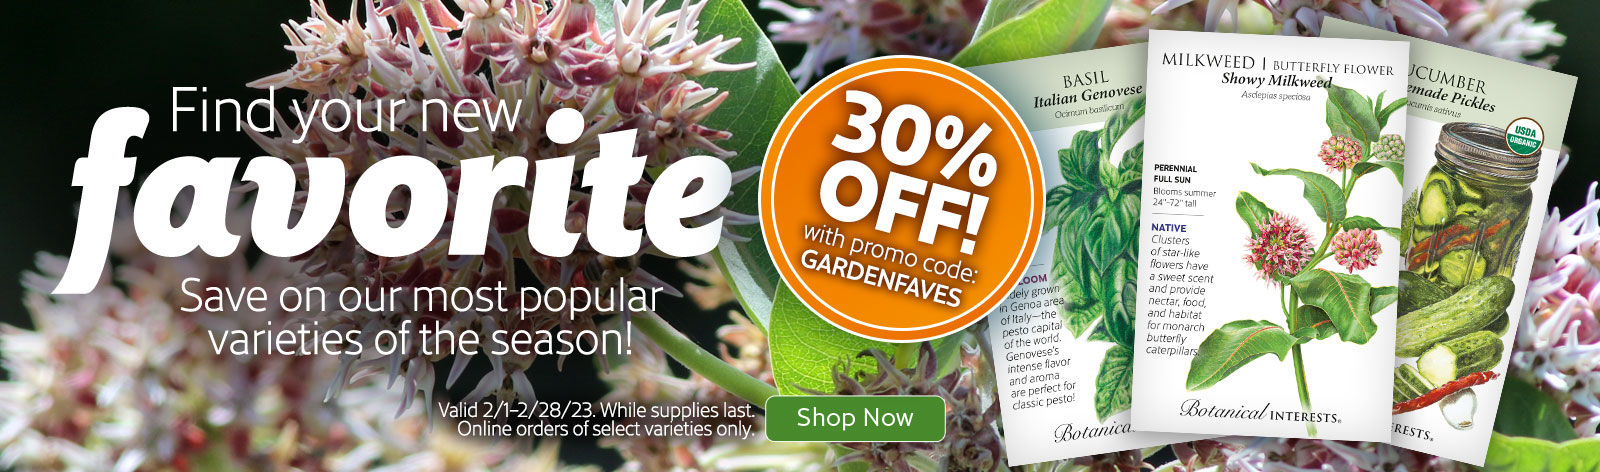 30% off our most popular varieties of 2023 from 2/1/23-2/28/23 with promo code GARDENFAVES.